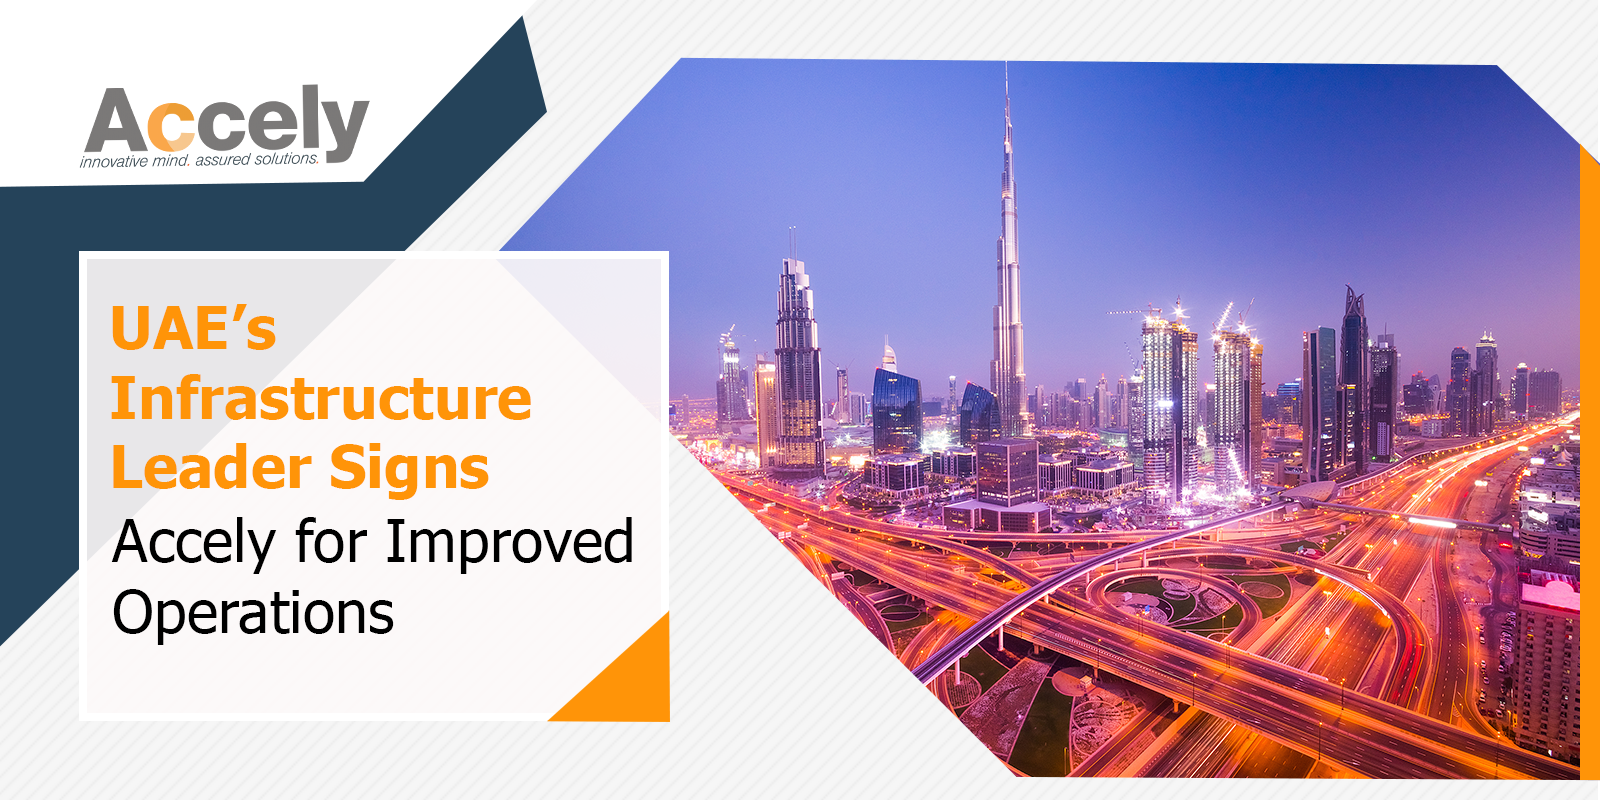 UAE’s Infrastructure Leader Signs Accely for Improved Operations